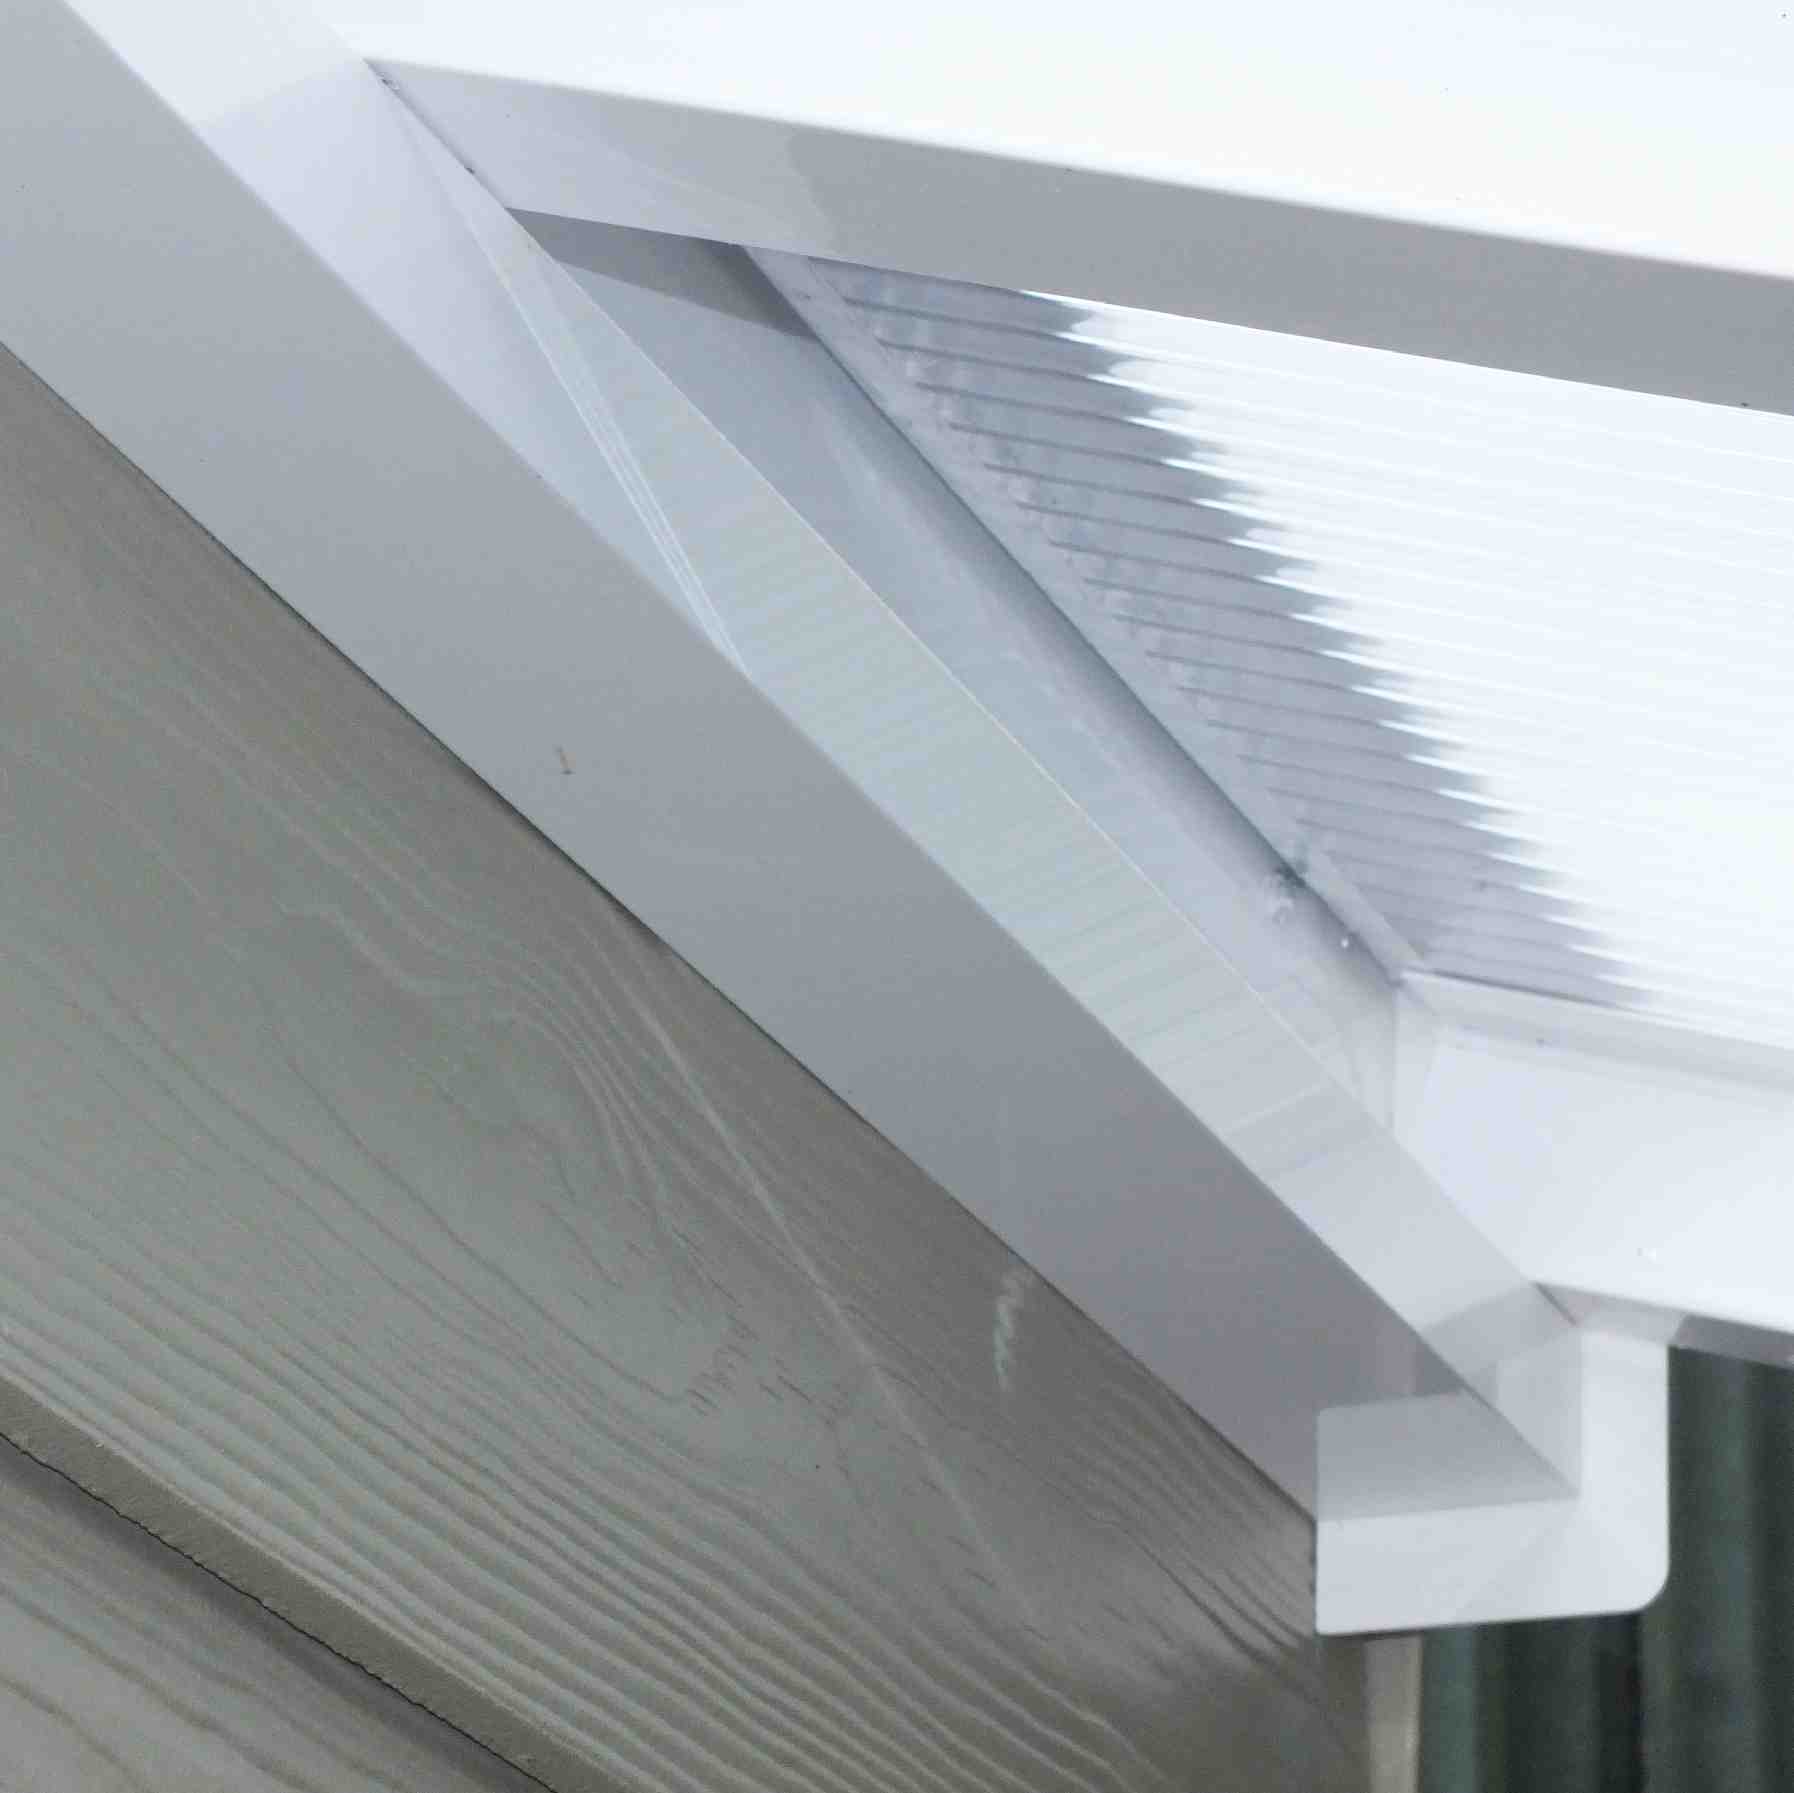 Great deals on Omega Verandah White with 16mm Polycarbonate Glazing - 12.0m (W) x 3.5m (P), (5) Supporting Posts